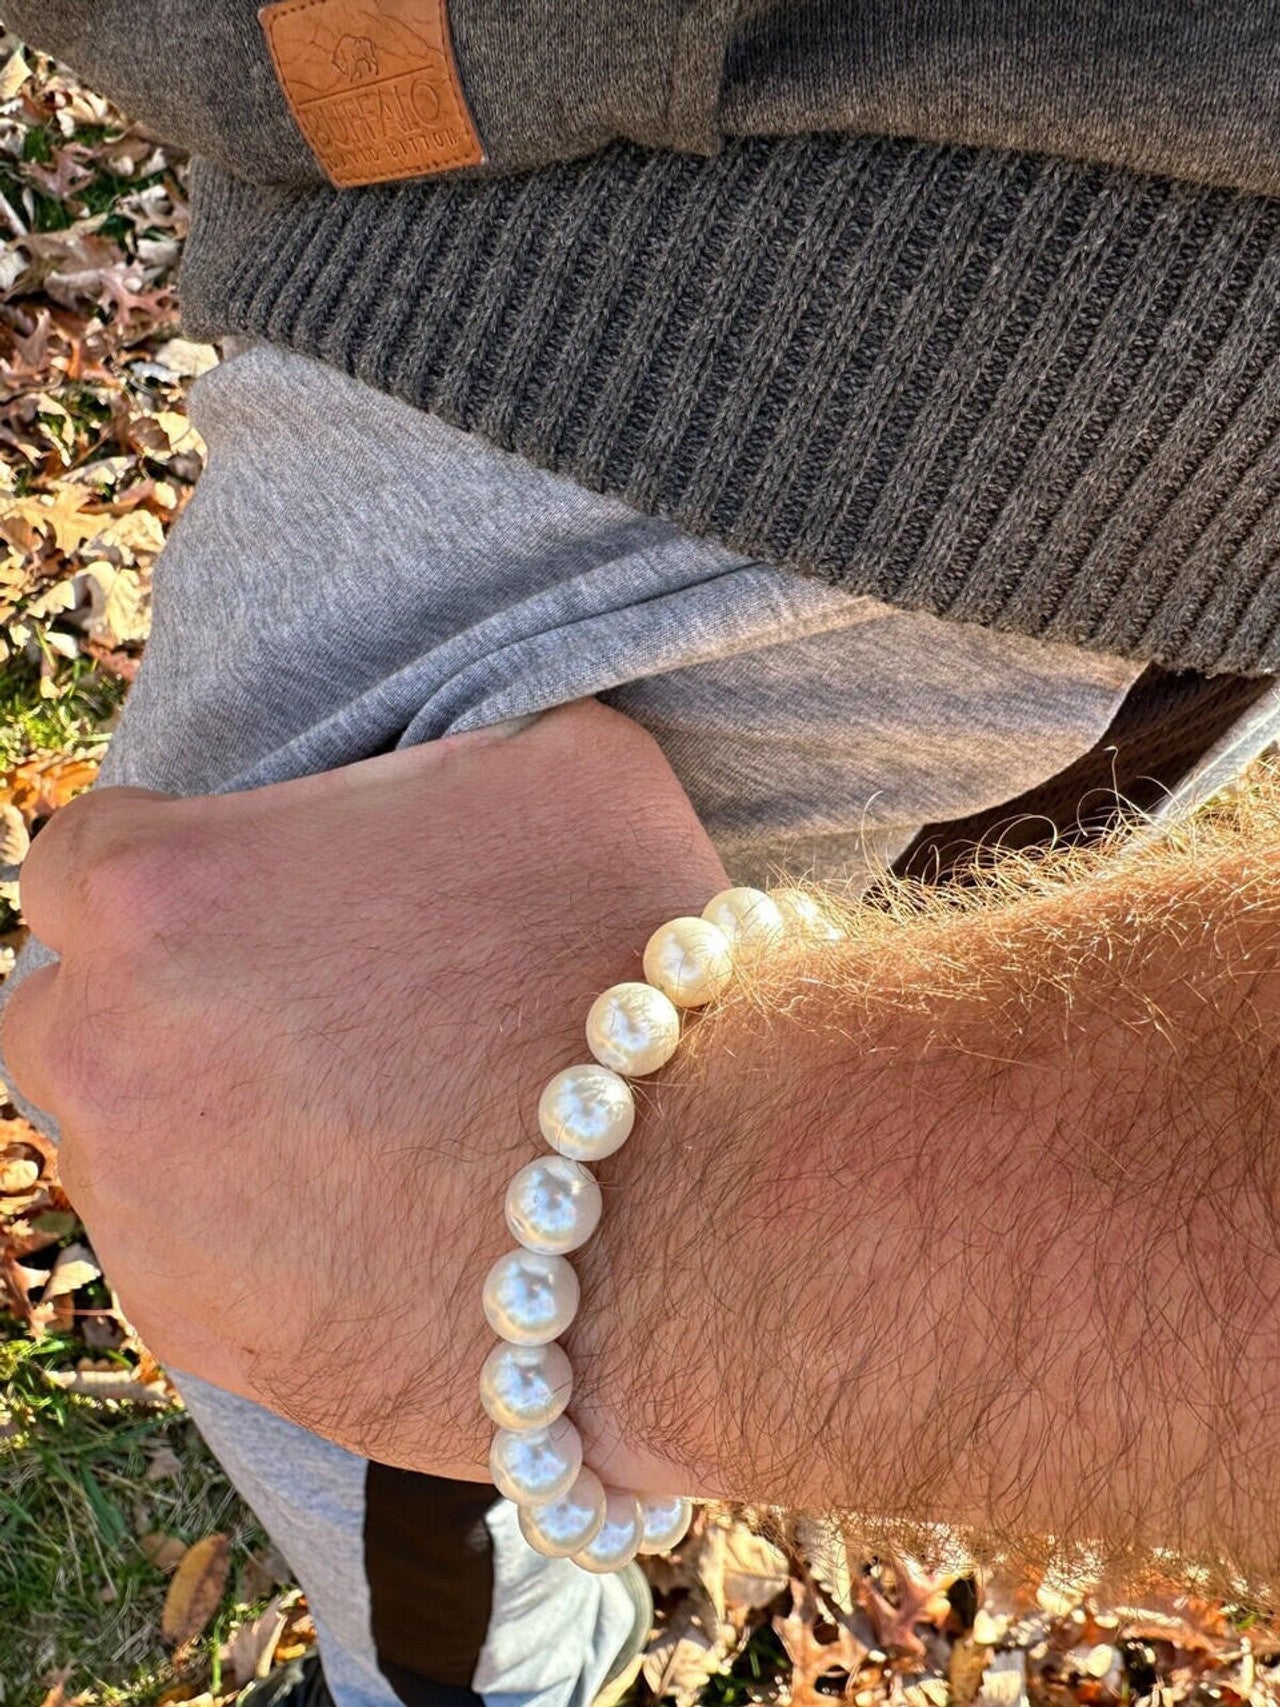 White Cultured Pearl Bracelet 925 Sterling Silver Clasp For Men & Women